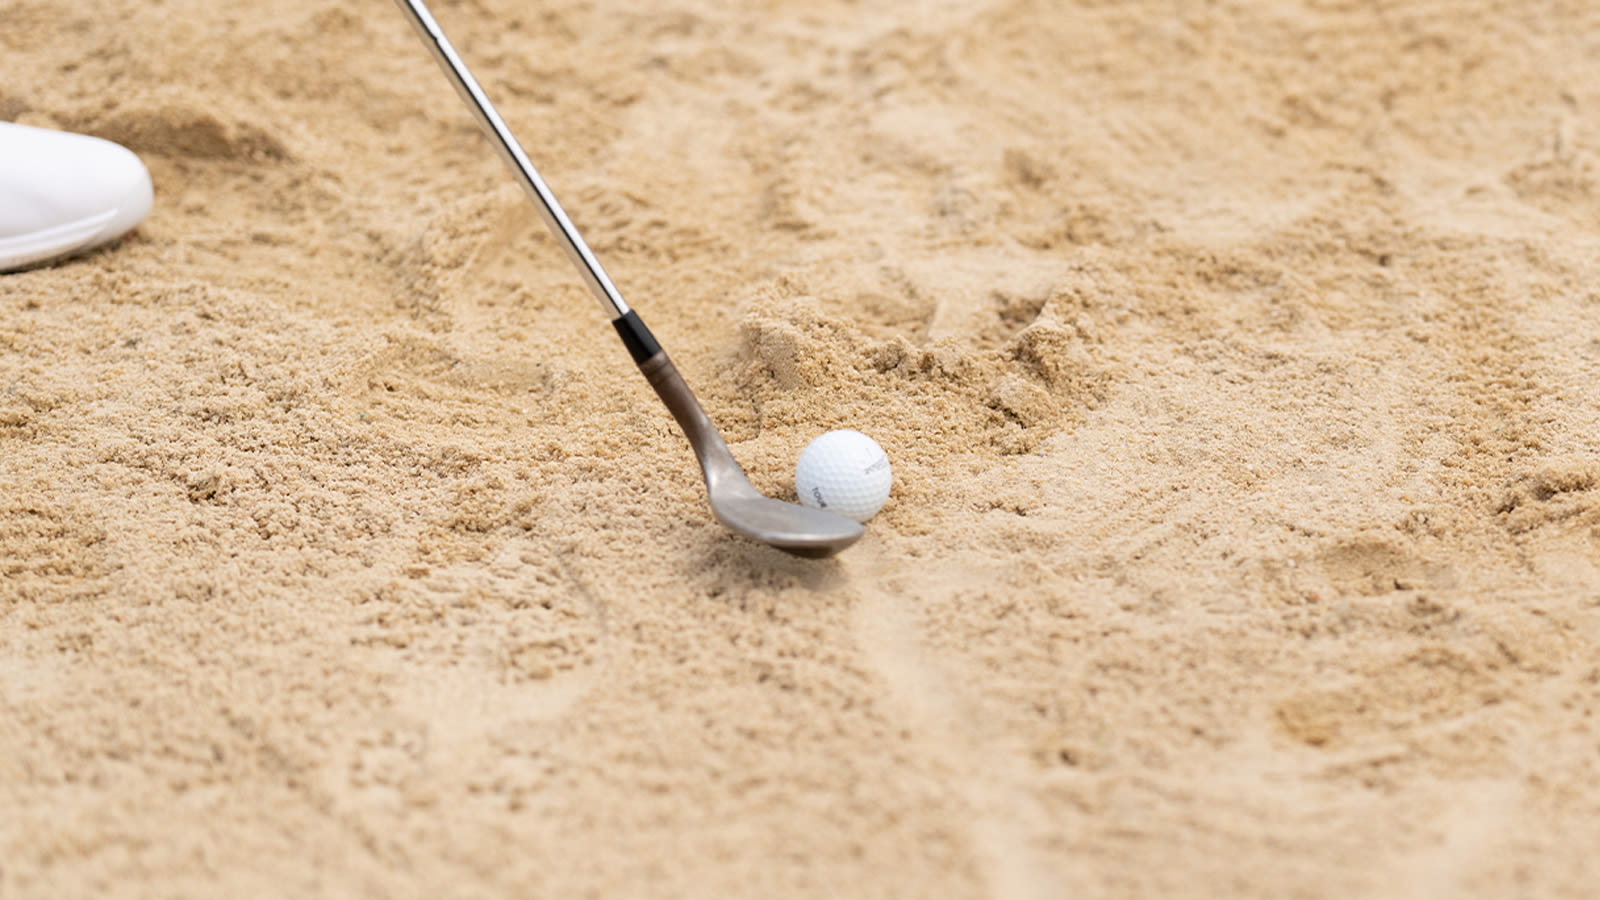 A view of how a sand wedge sits in the bunker at 2022 PGA Championship held at Southern Hills Country Club on May 17, 2022 in Tulsa, Oklahoma. (Photo by Darren Carroll/PGA of America)